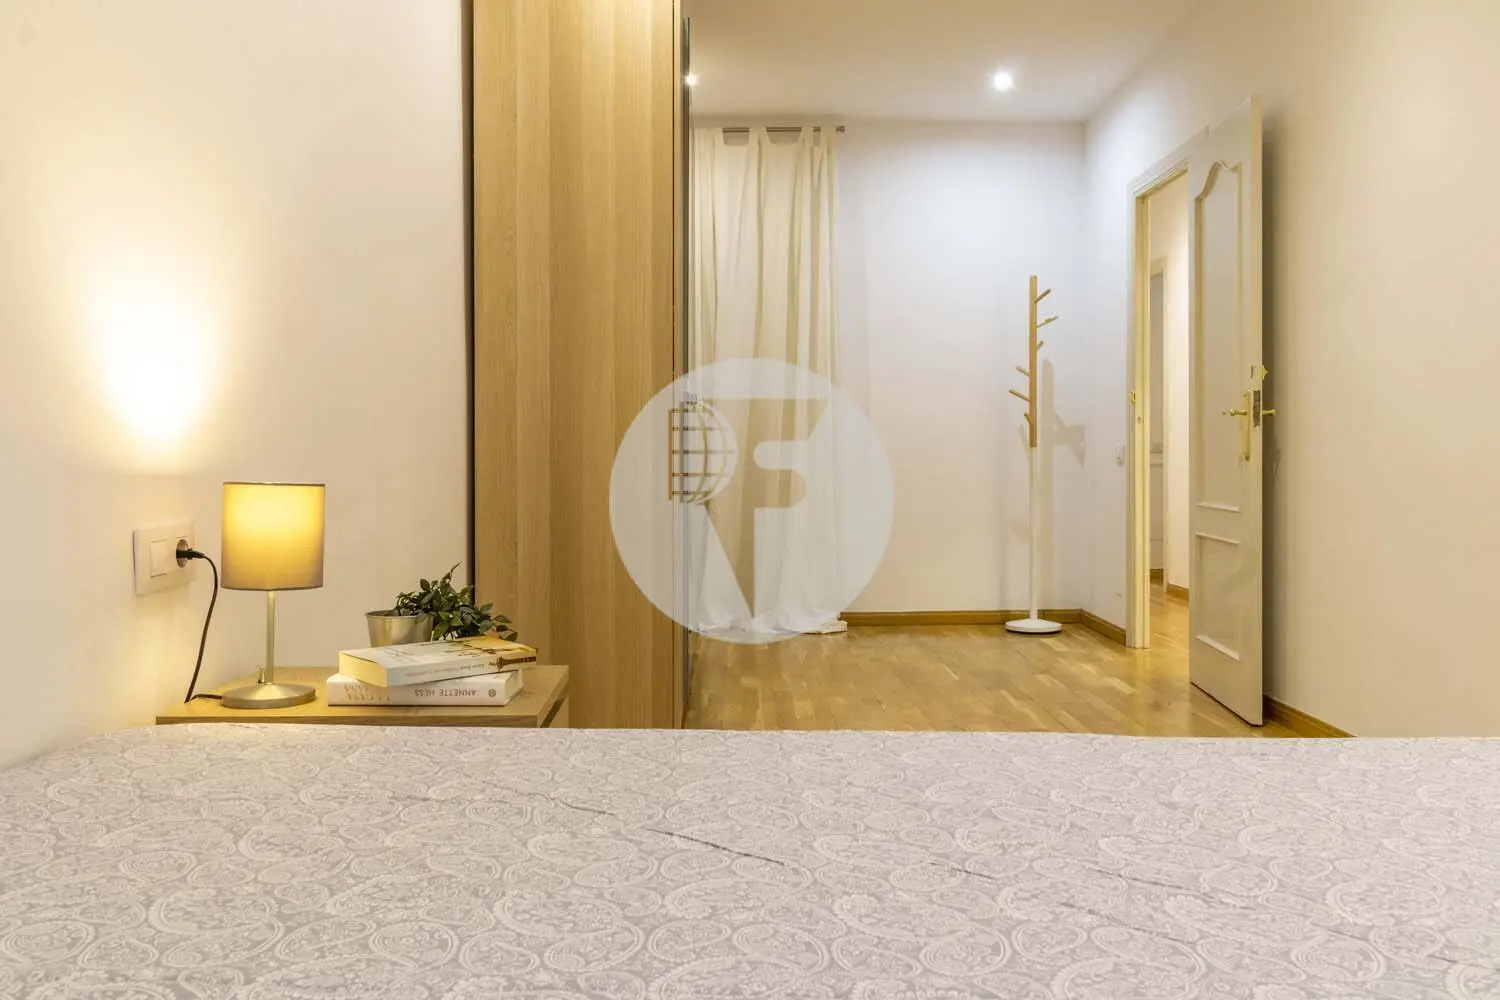 Furnished and equipped on Rosselló Street 27